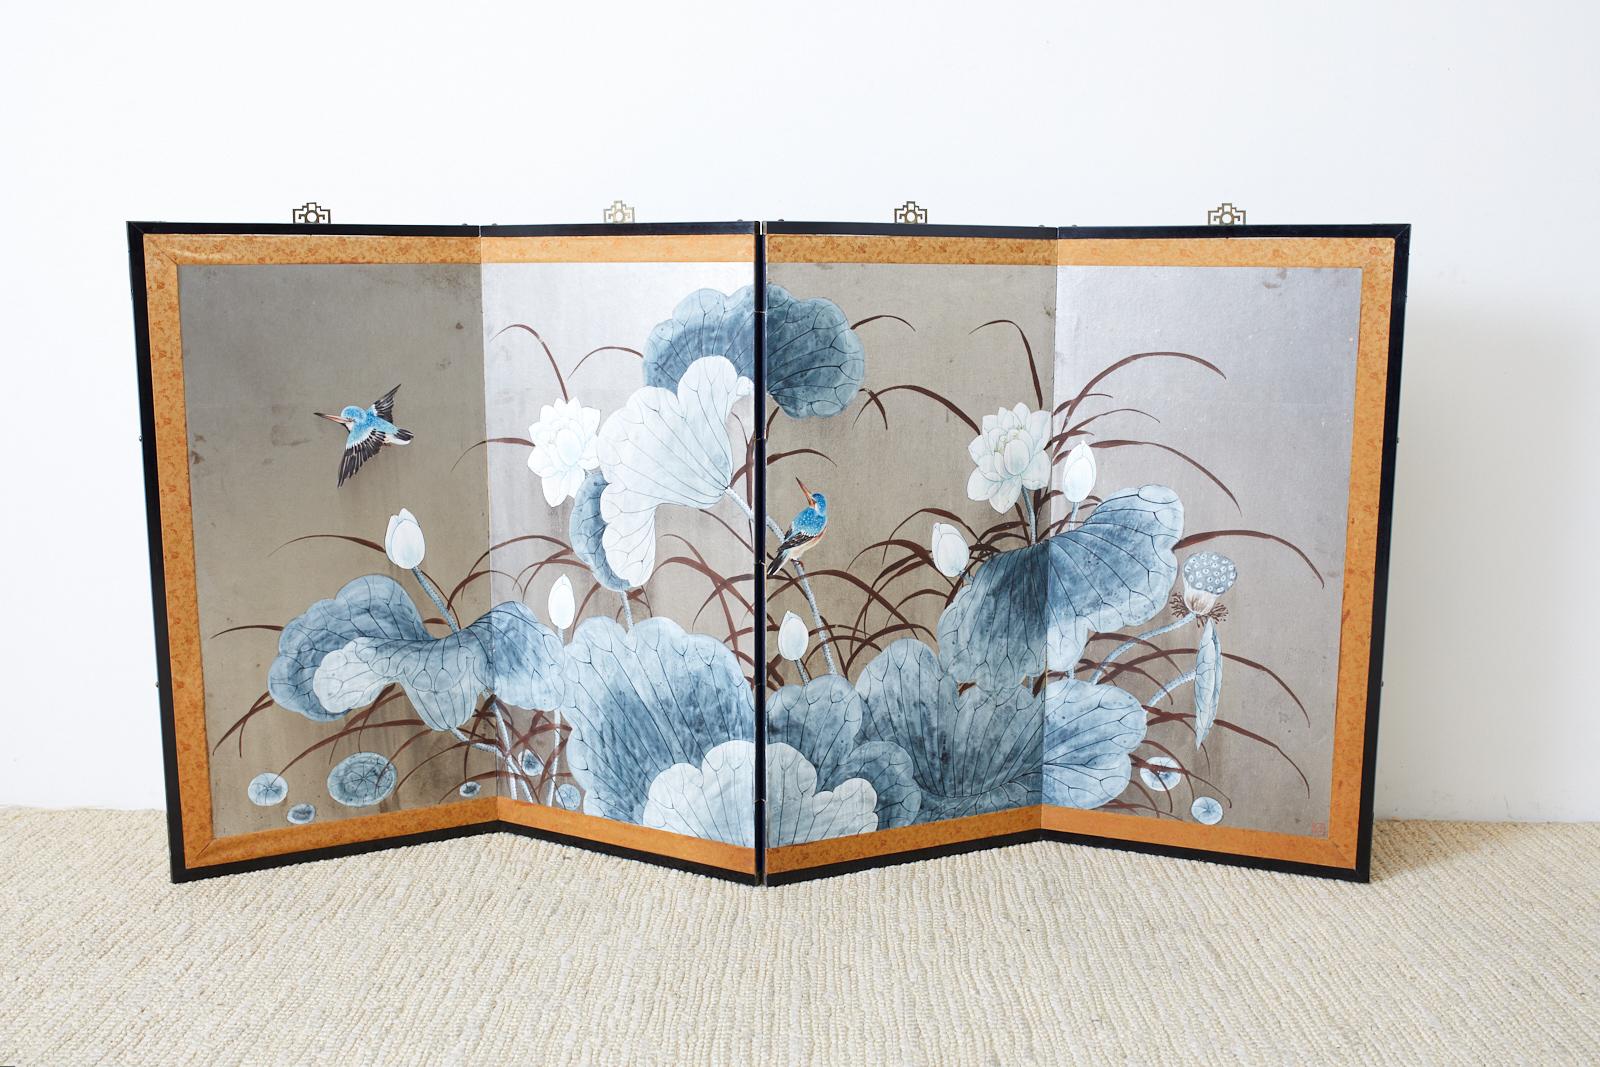 Stunning Japanese Showa period four-panel screen depicting large blossoming lotus leaves and kingfishers over a dramatic silver leaf ground. The screen is set in a lacquered wood frame with a brocade silk border and etched brass hardware. From an